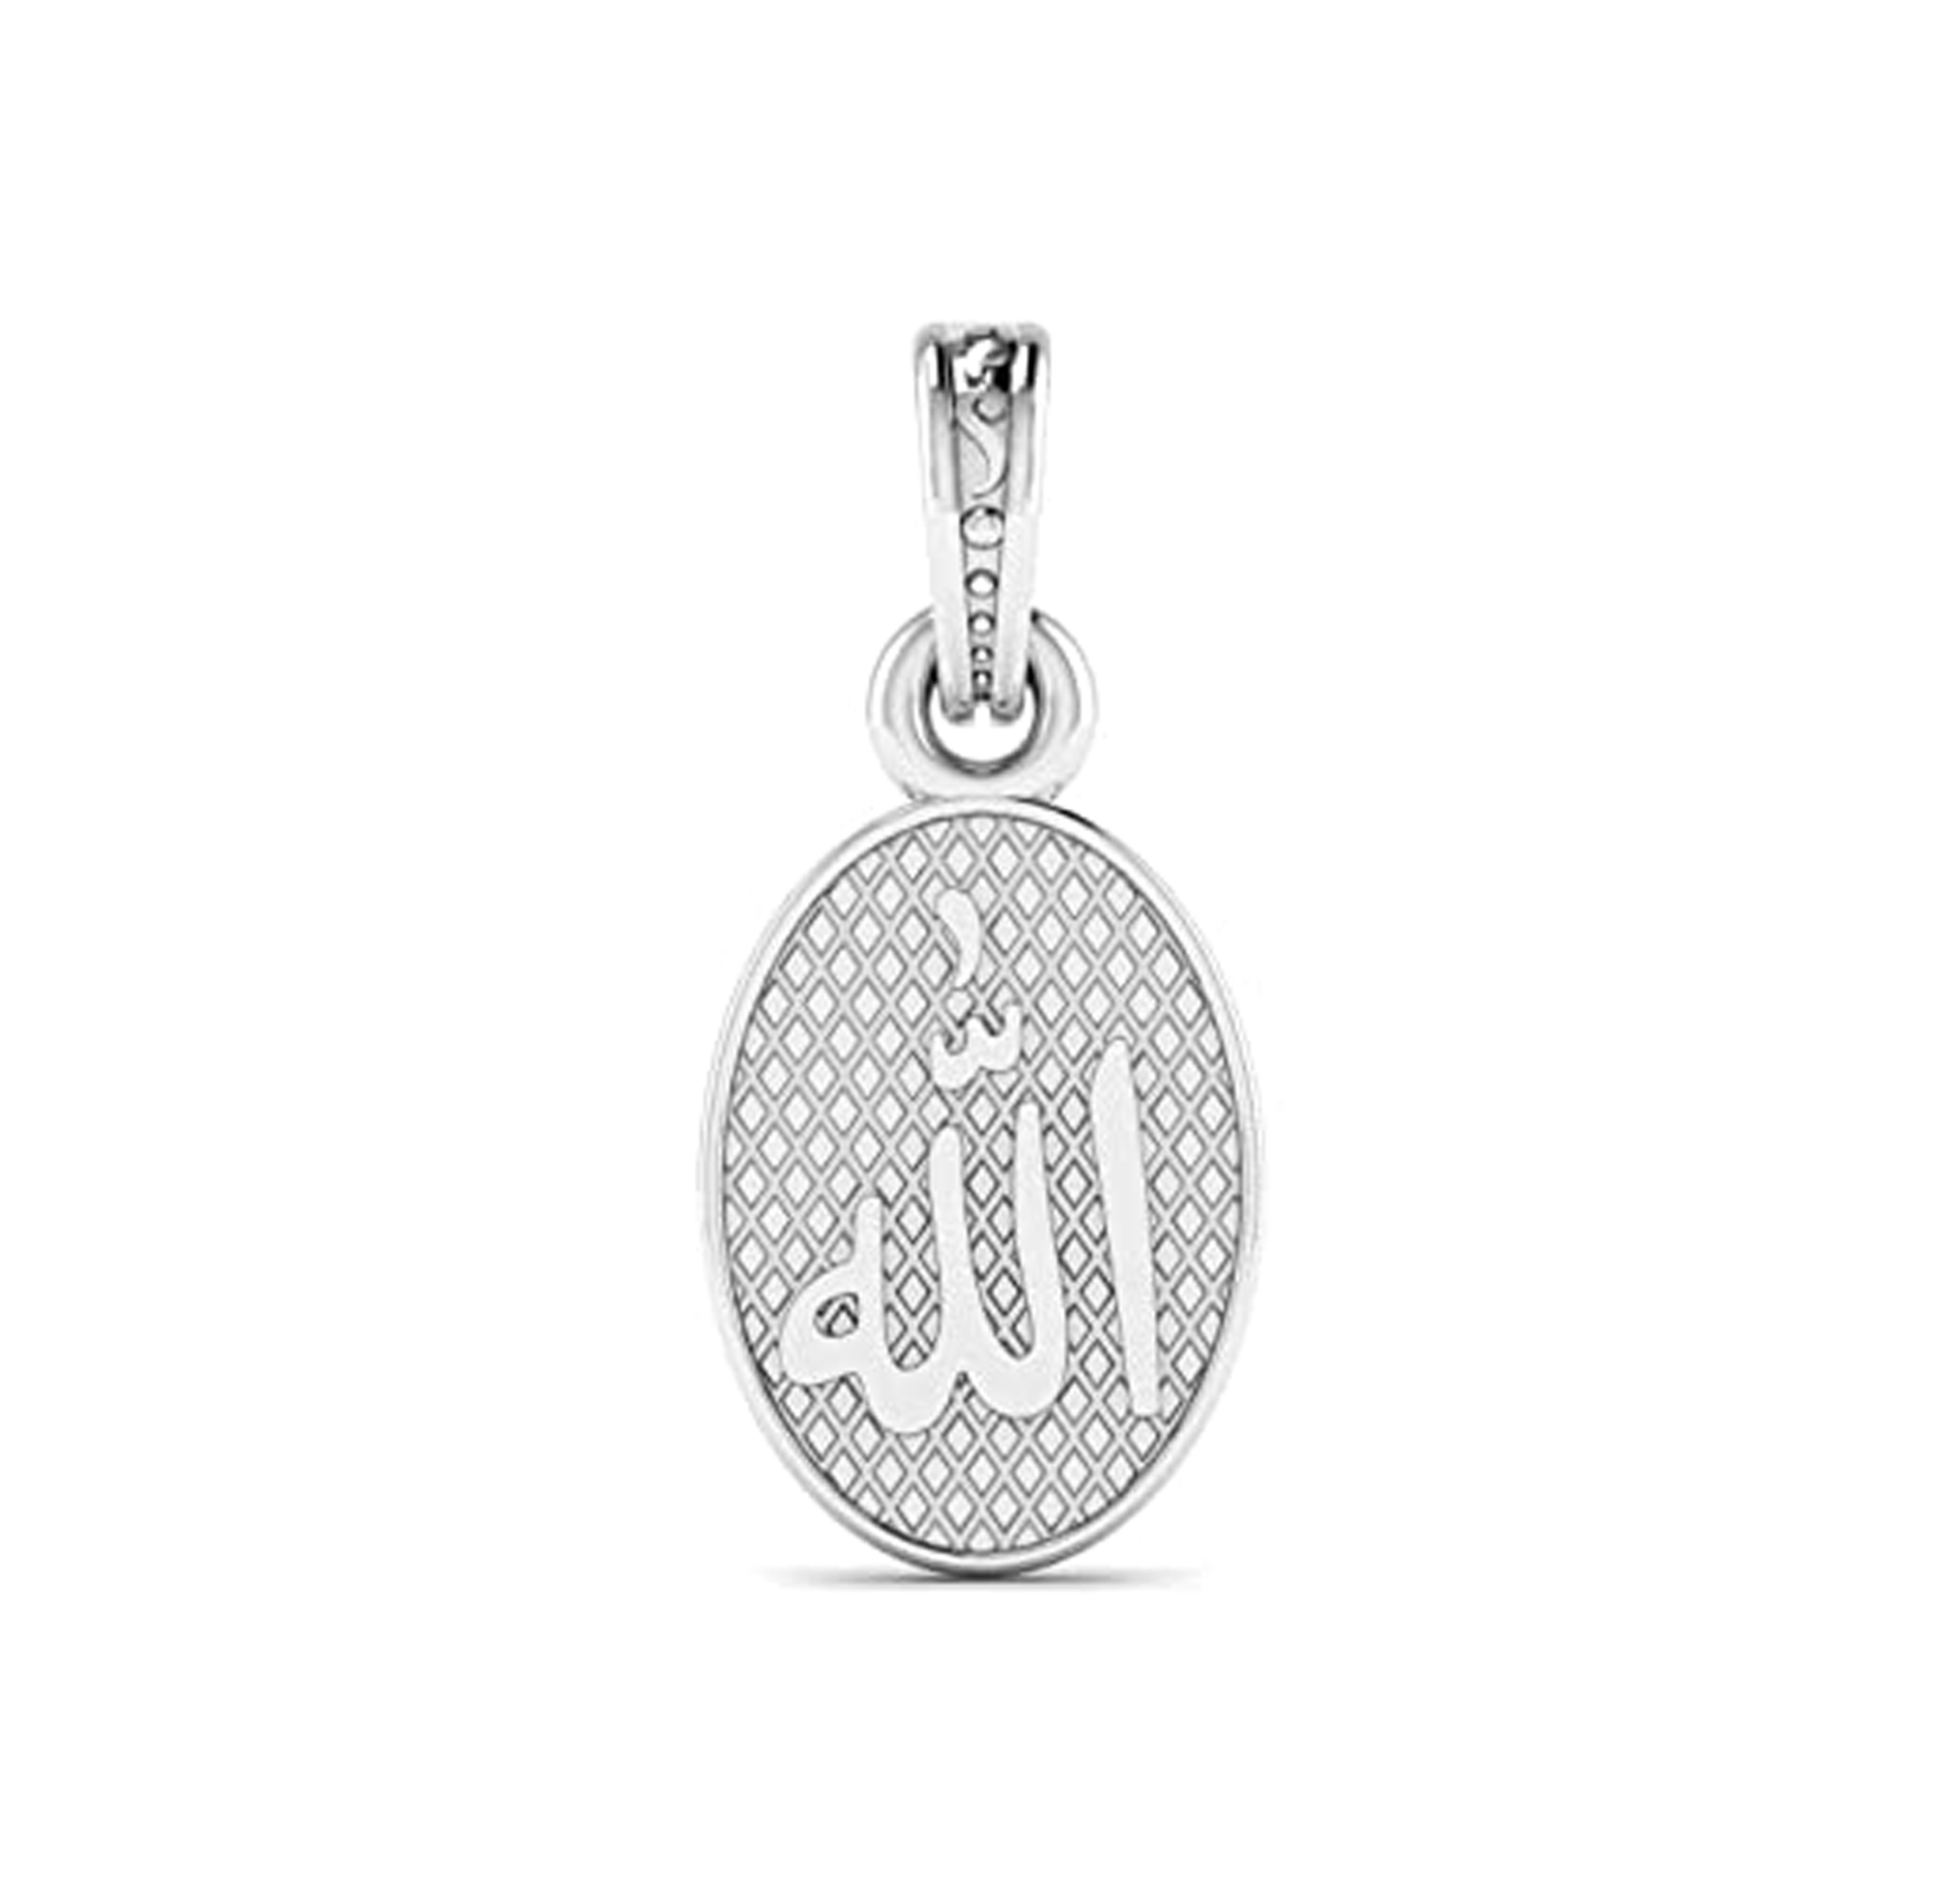 Buy Men's gold Allah Necklace Men's Gold Stainless Steel Muslim Allah  Symbol Pendant Necklace Mens Stainless Steel Box Chain Necklace Online in  India - Etsy